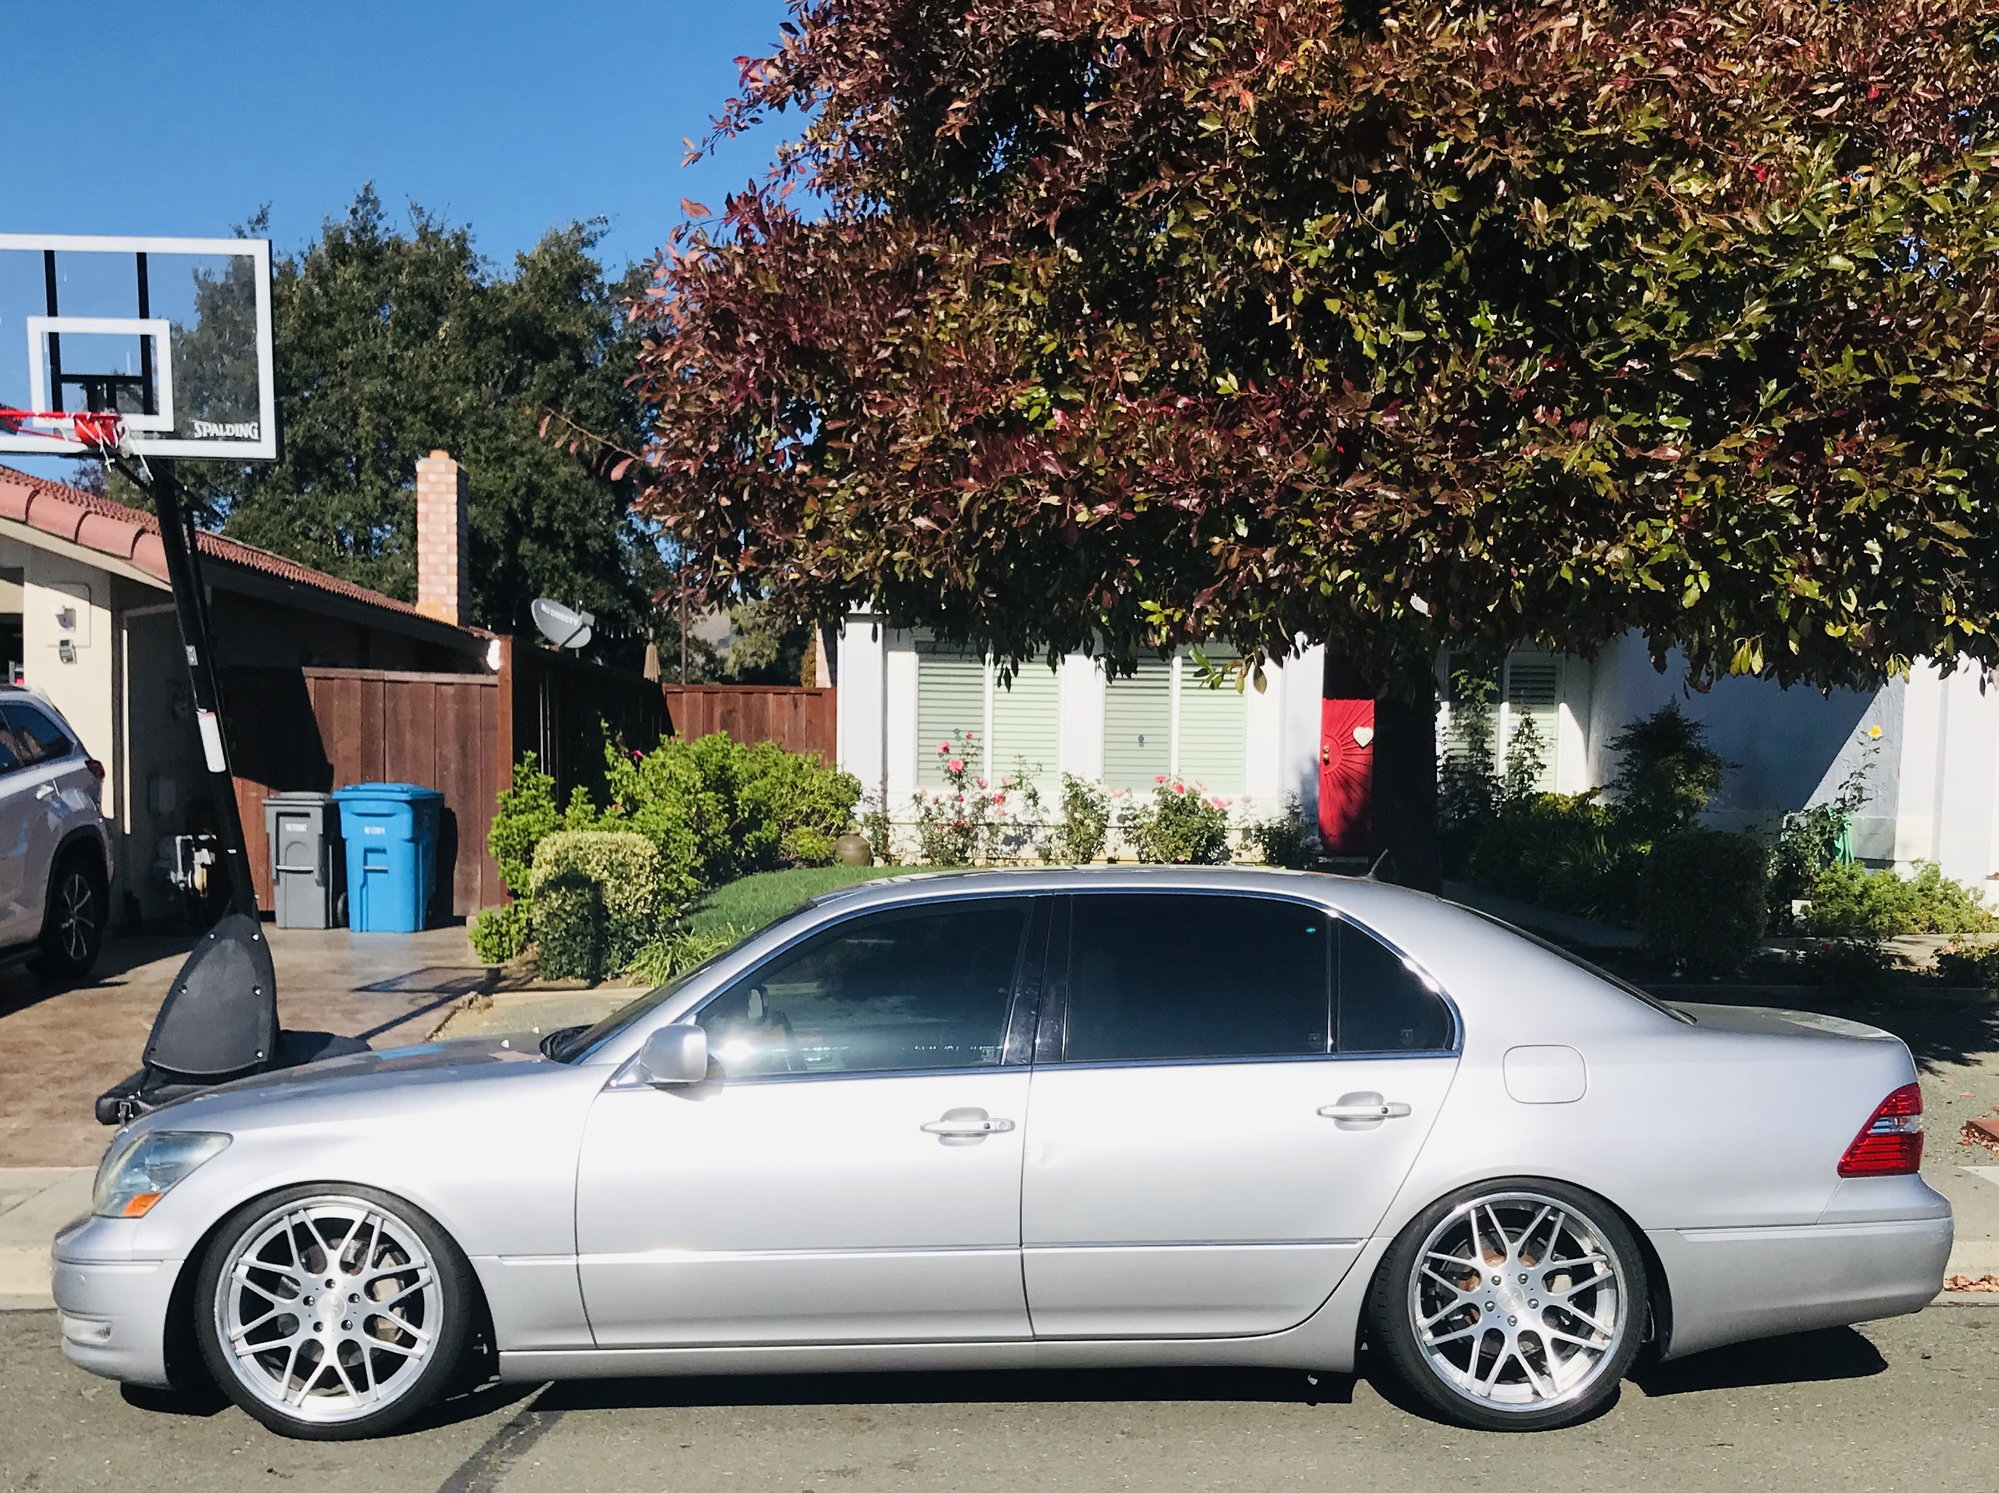 2004 Lexus LS430 - 2004 Lexus LS 430 w/ BC Coilovers *Clean title* $3999 OBO - Used - VIN JTHBN36F340133296 - 325,700 Miles - 8 cyl - 2WD - Automatic - Sedan - Silver - Vallejo, CA 94591, United States